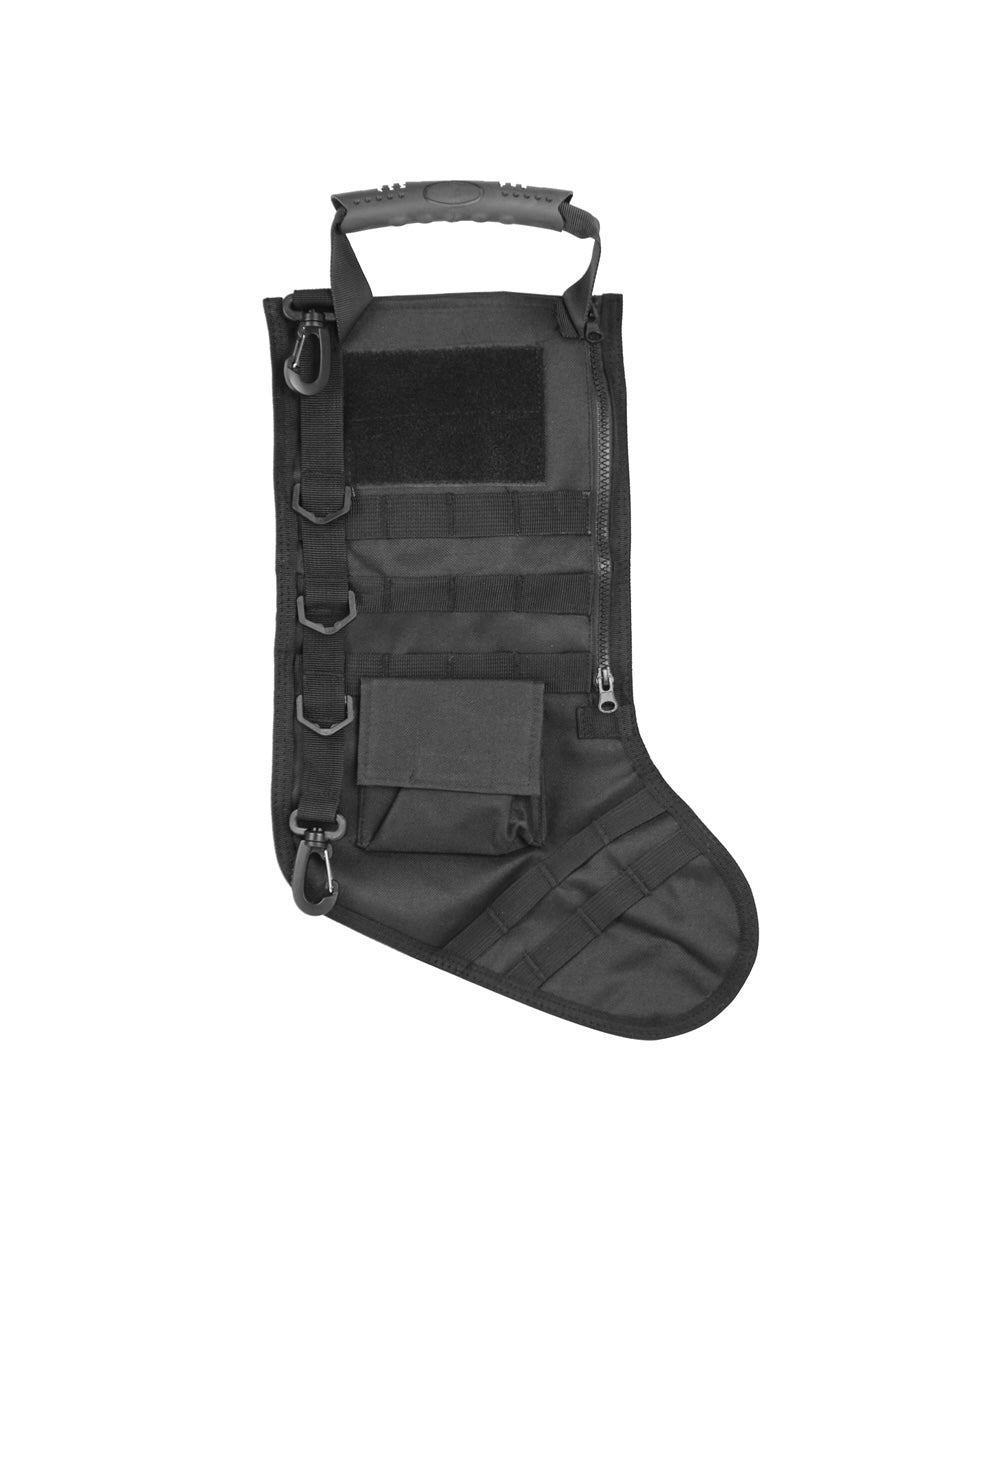 Tactical Christmas Stocking & TSRT Patch